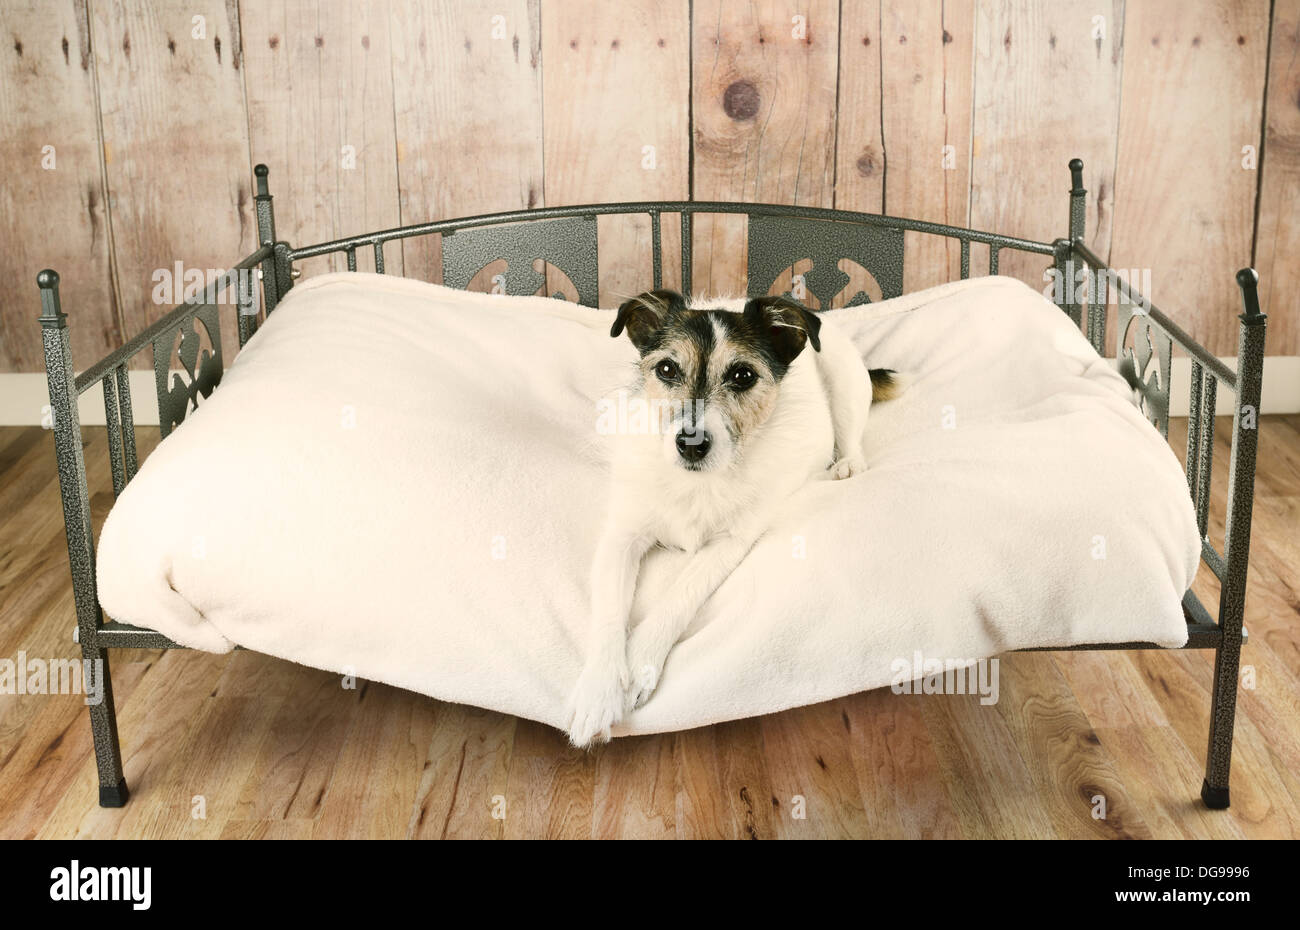 Jack Russell Terrier dog relaxing in luxury dog bed Banque D'Images